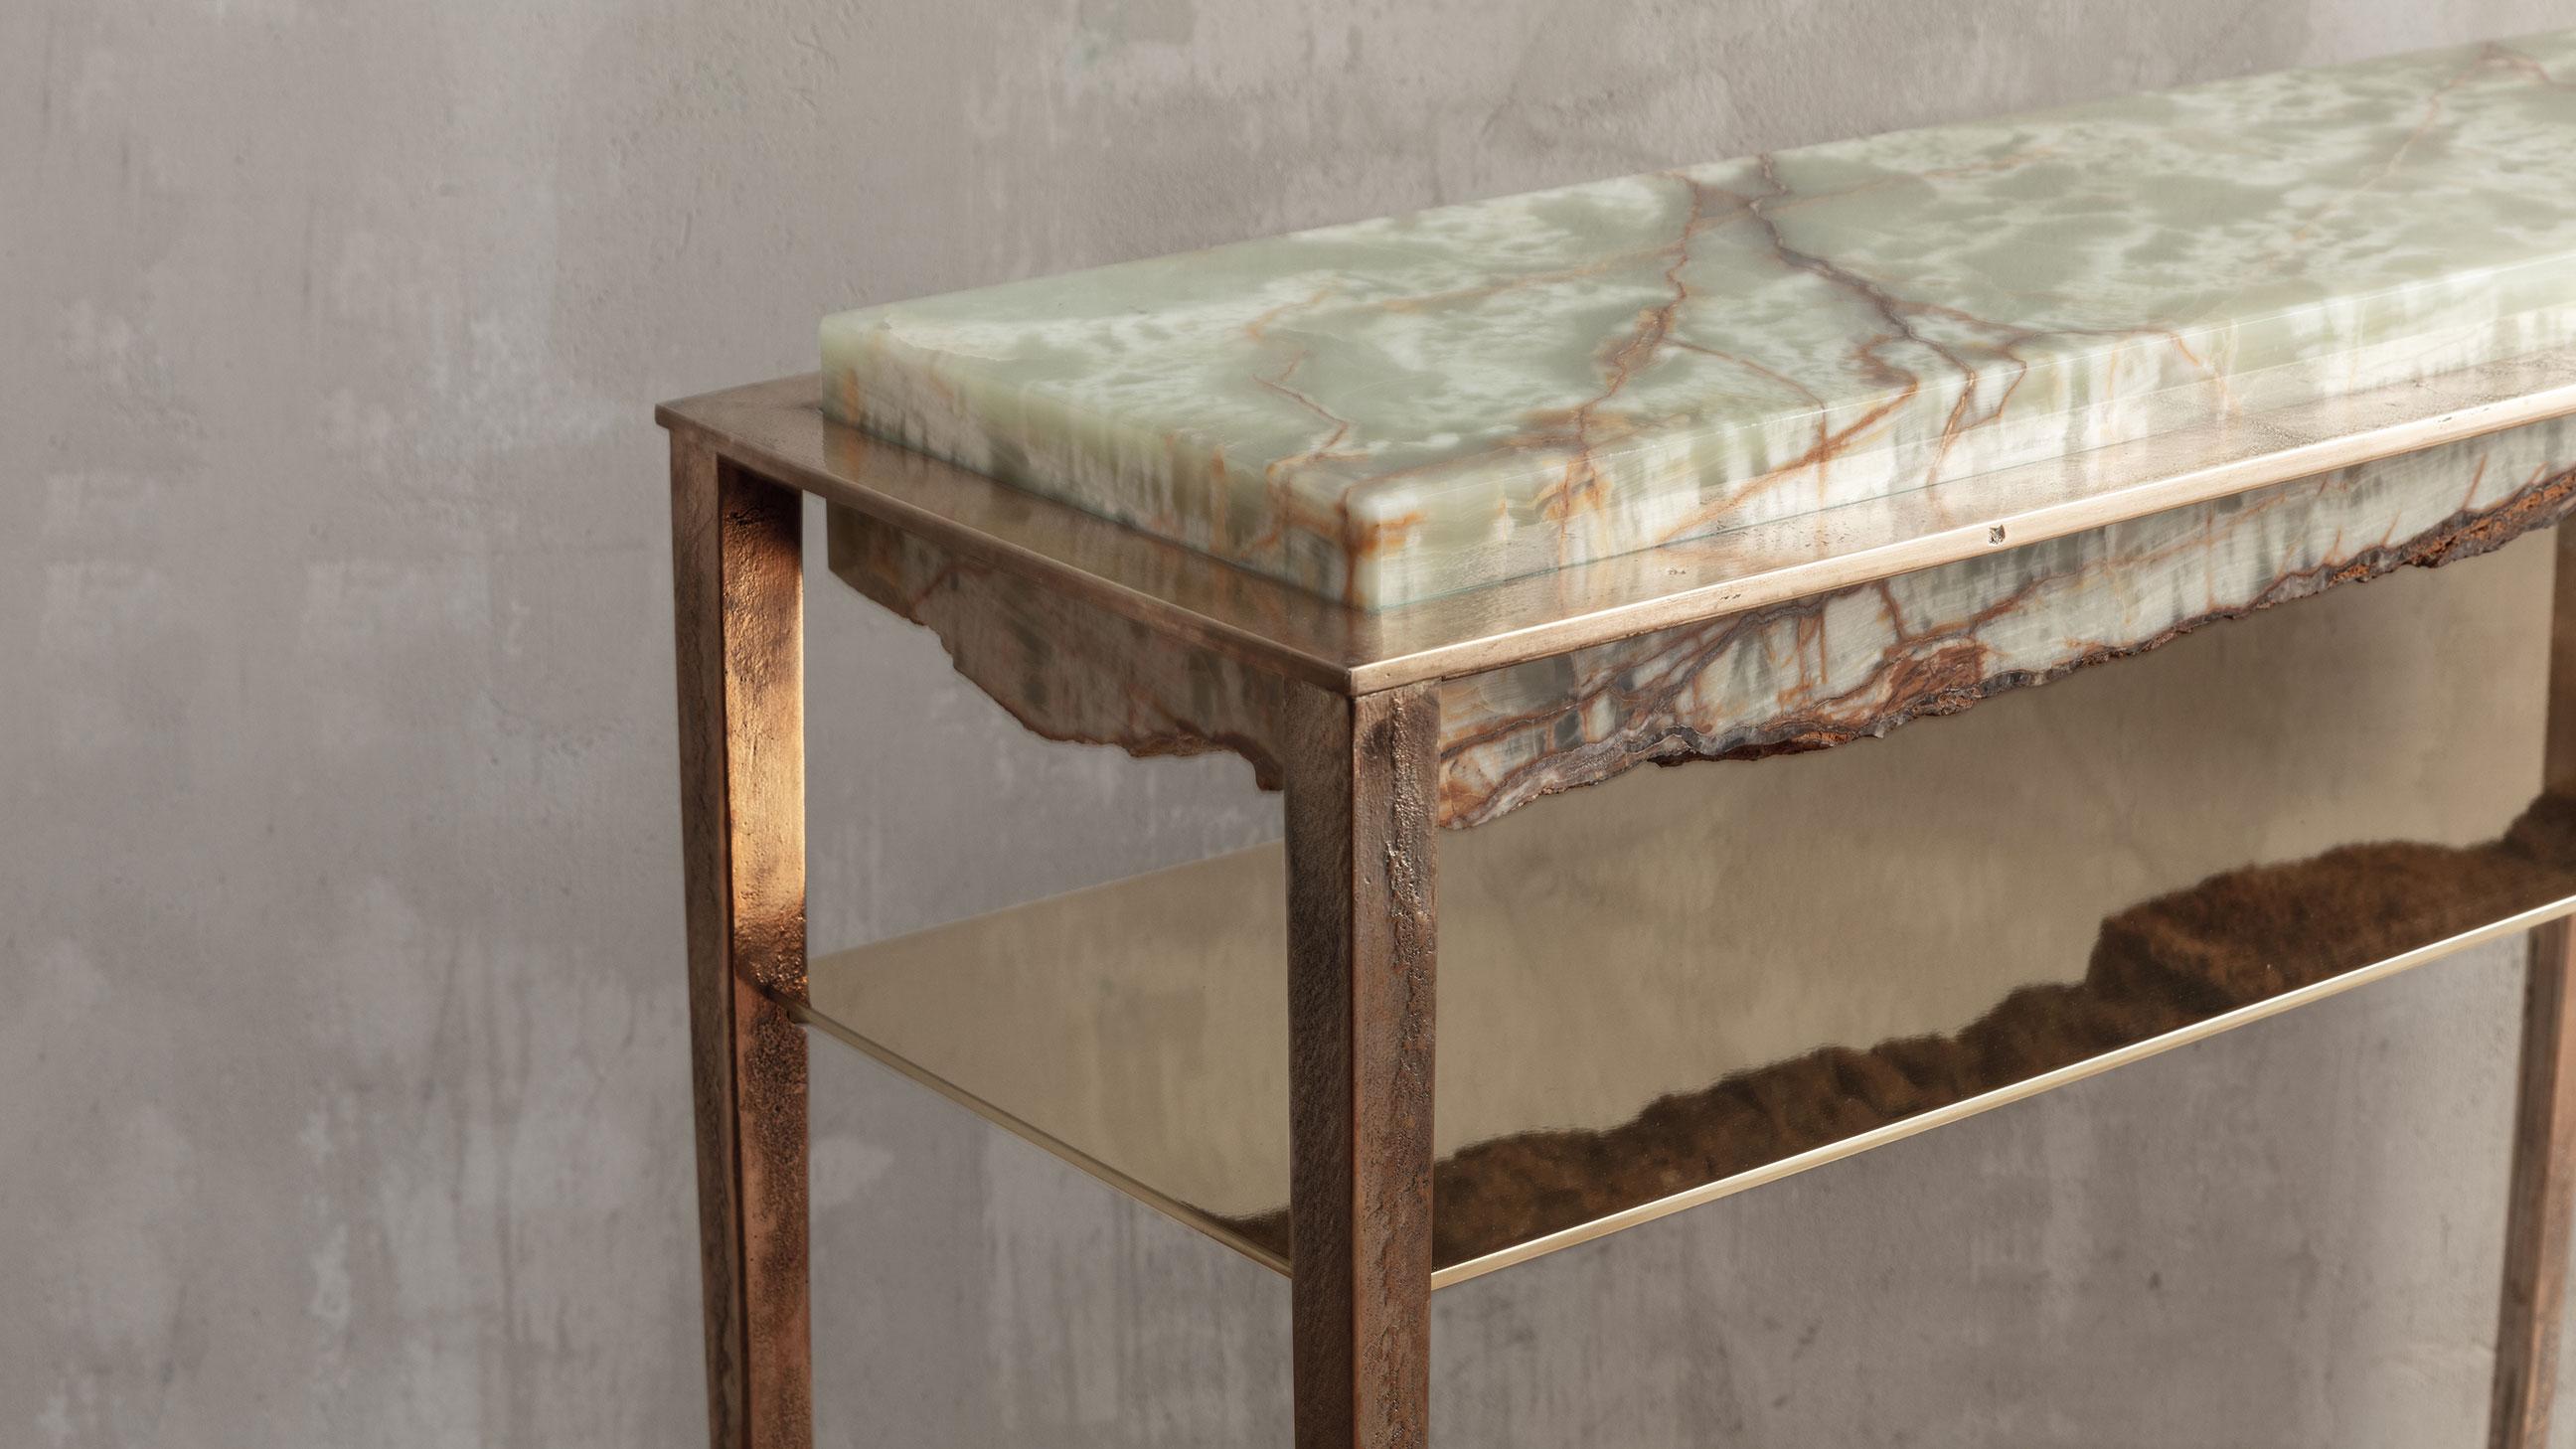 Each of these unique tables by acclaimed artist and master-craftsman, Gianluca Pacchioni, is handcrafted at the sculptor's studio in Milan. Slabs of individually sourced and hand-hewn green onyx are suspended mid-air by uncannily thin legs. 

A